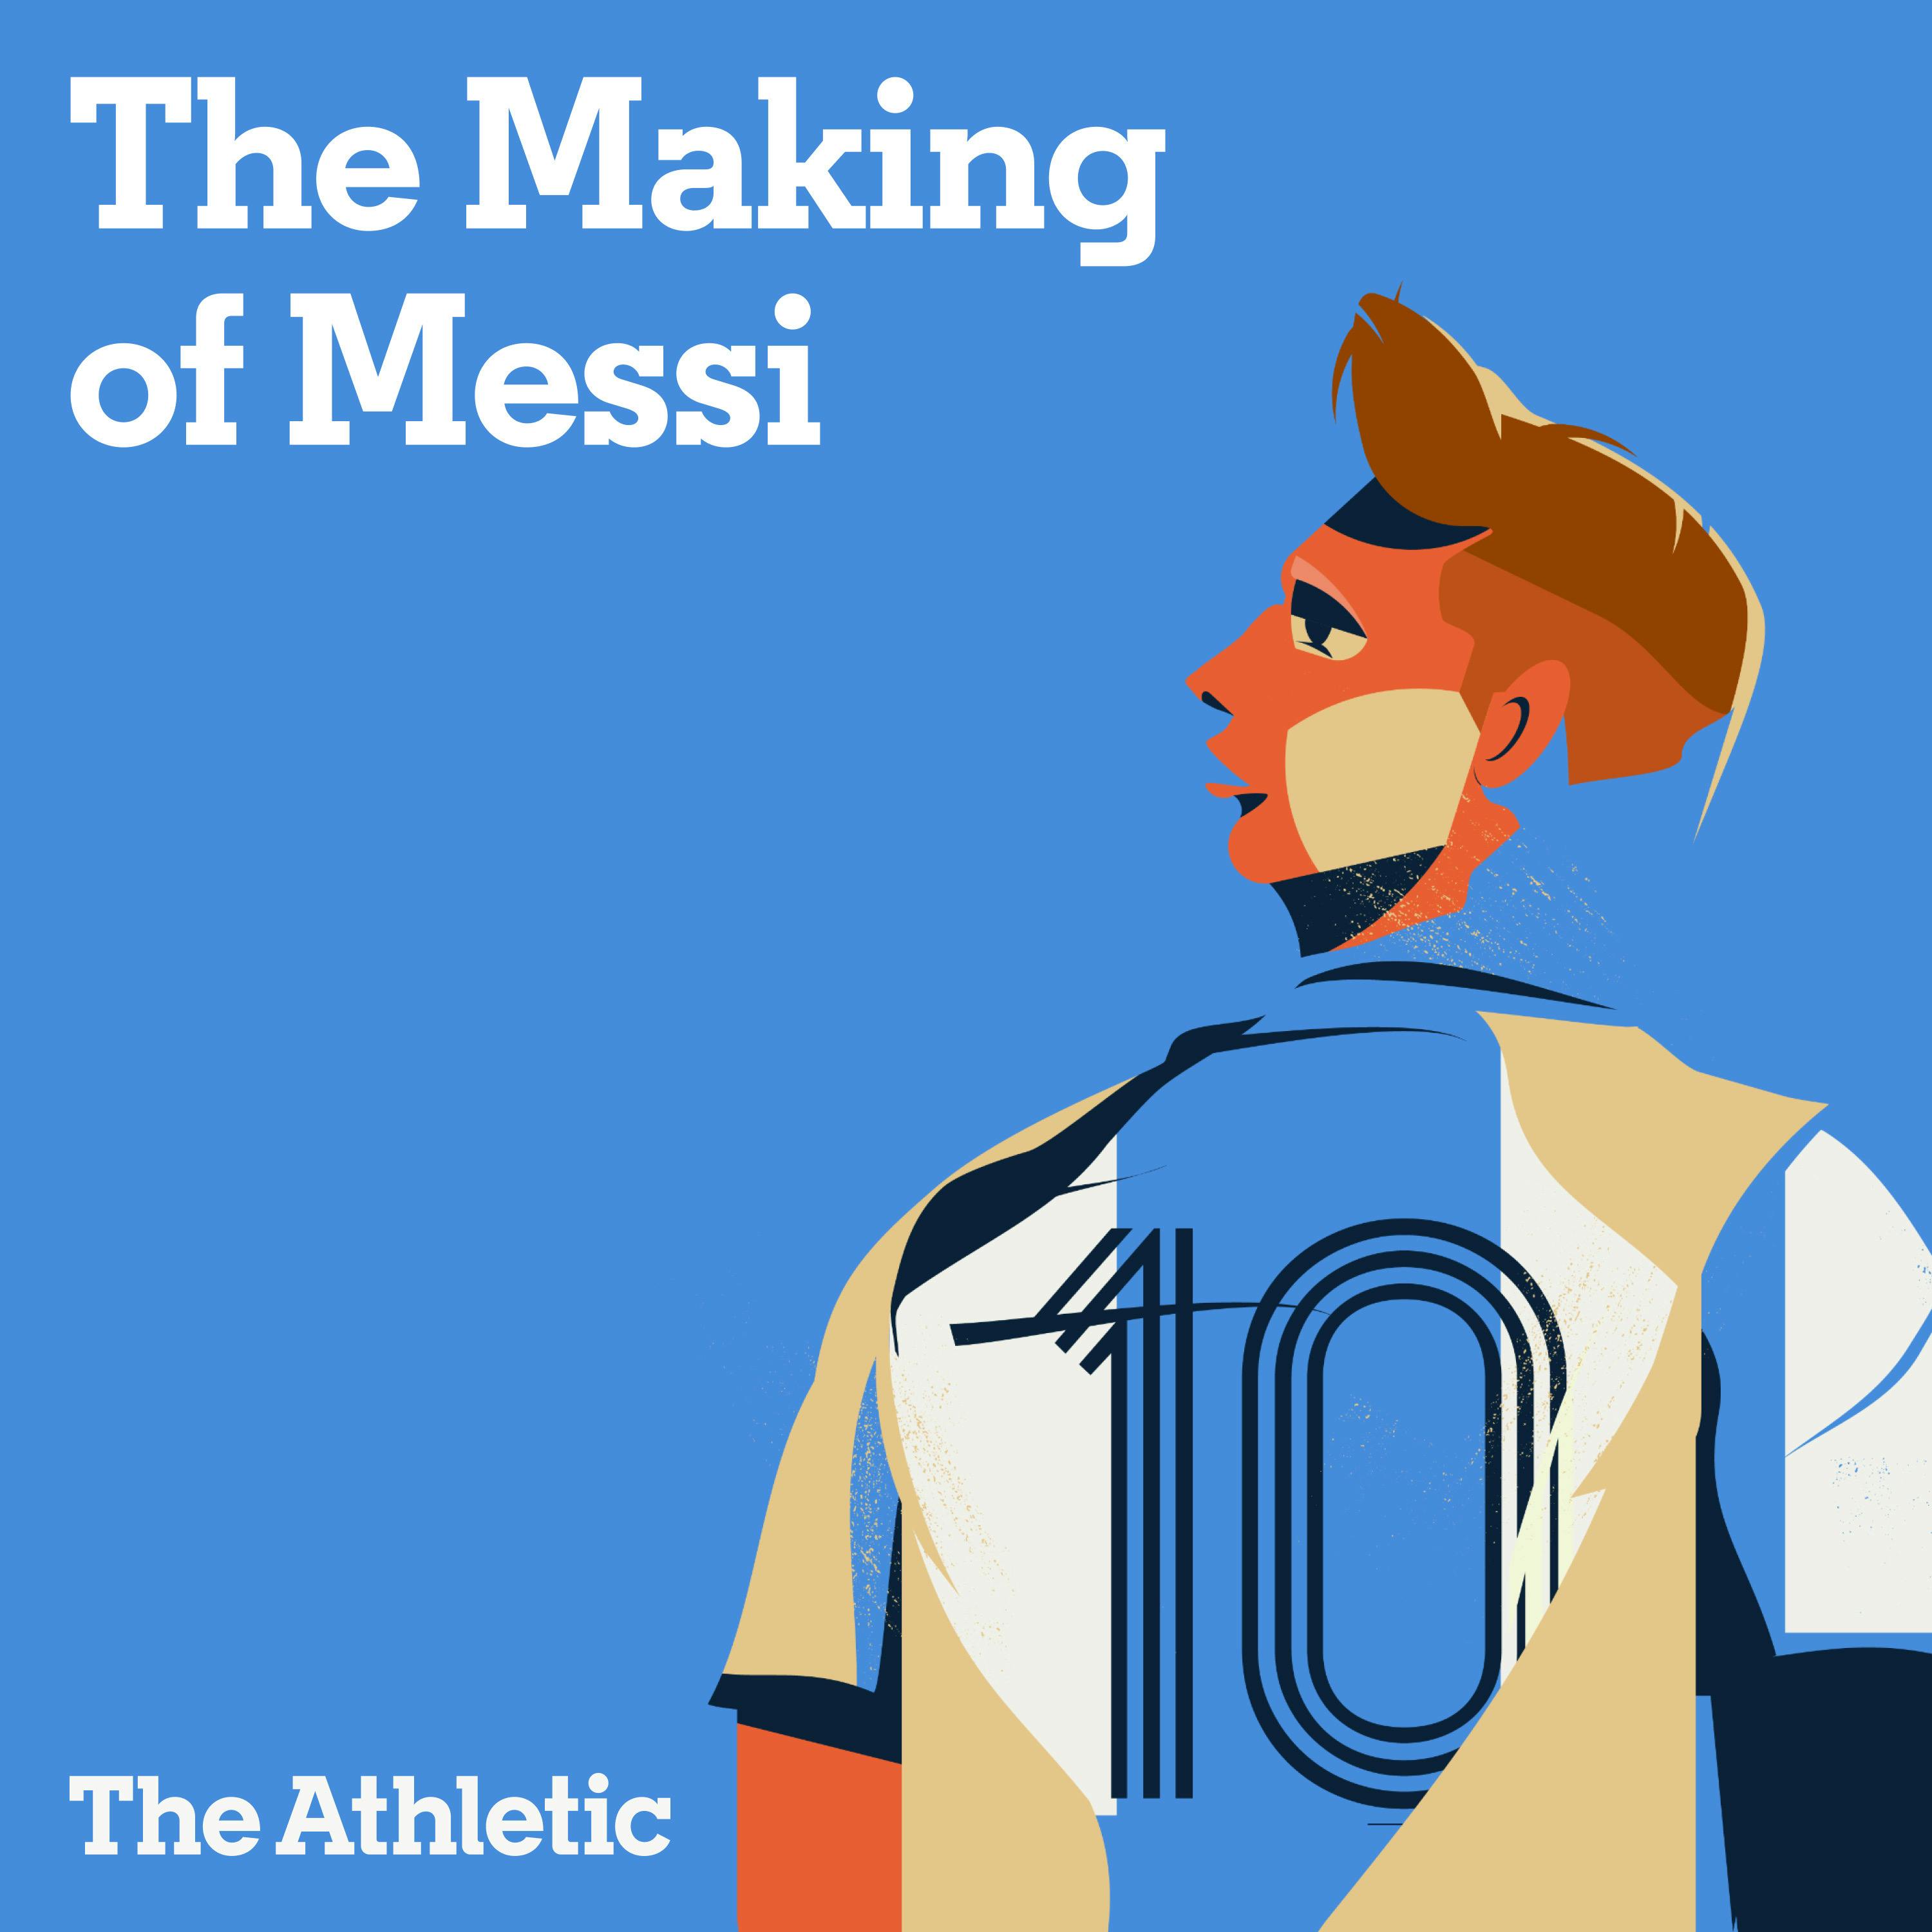 The Making of Messi: Part Three - Leaving a Legacy